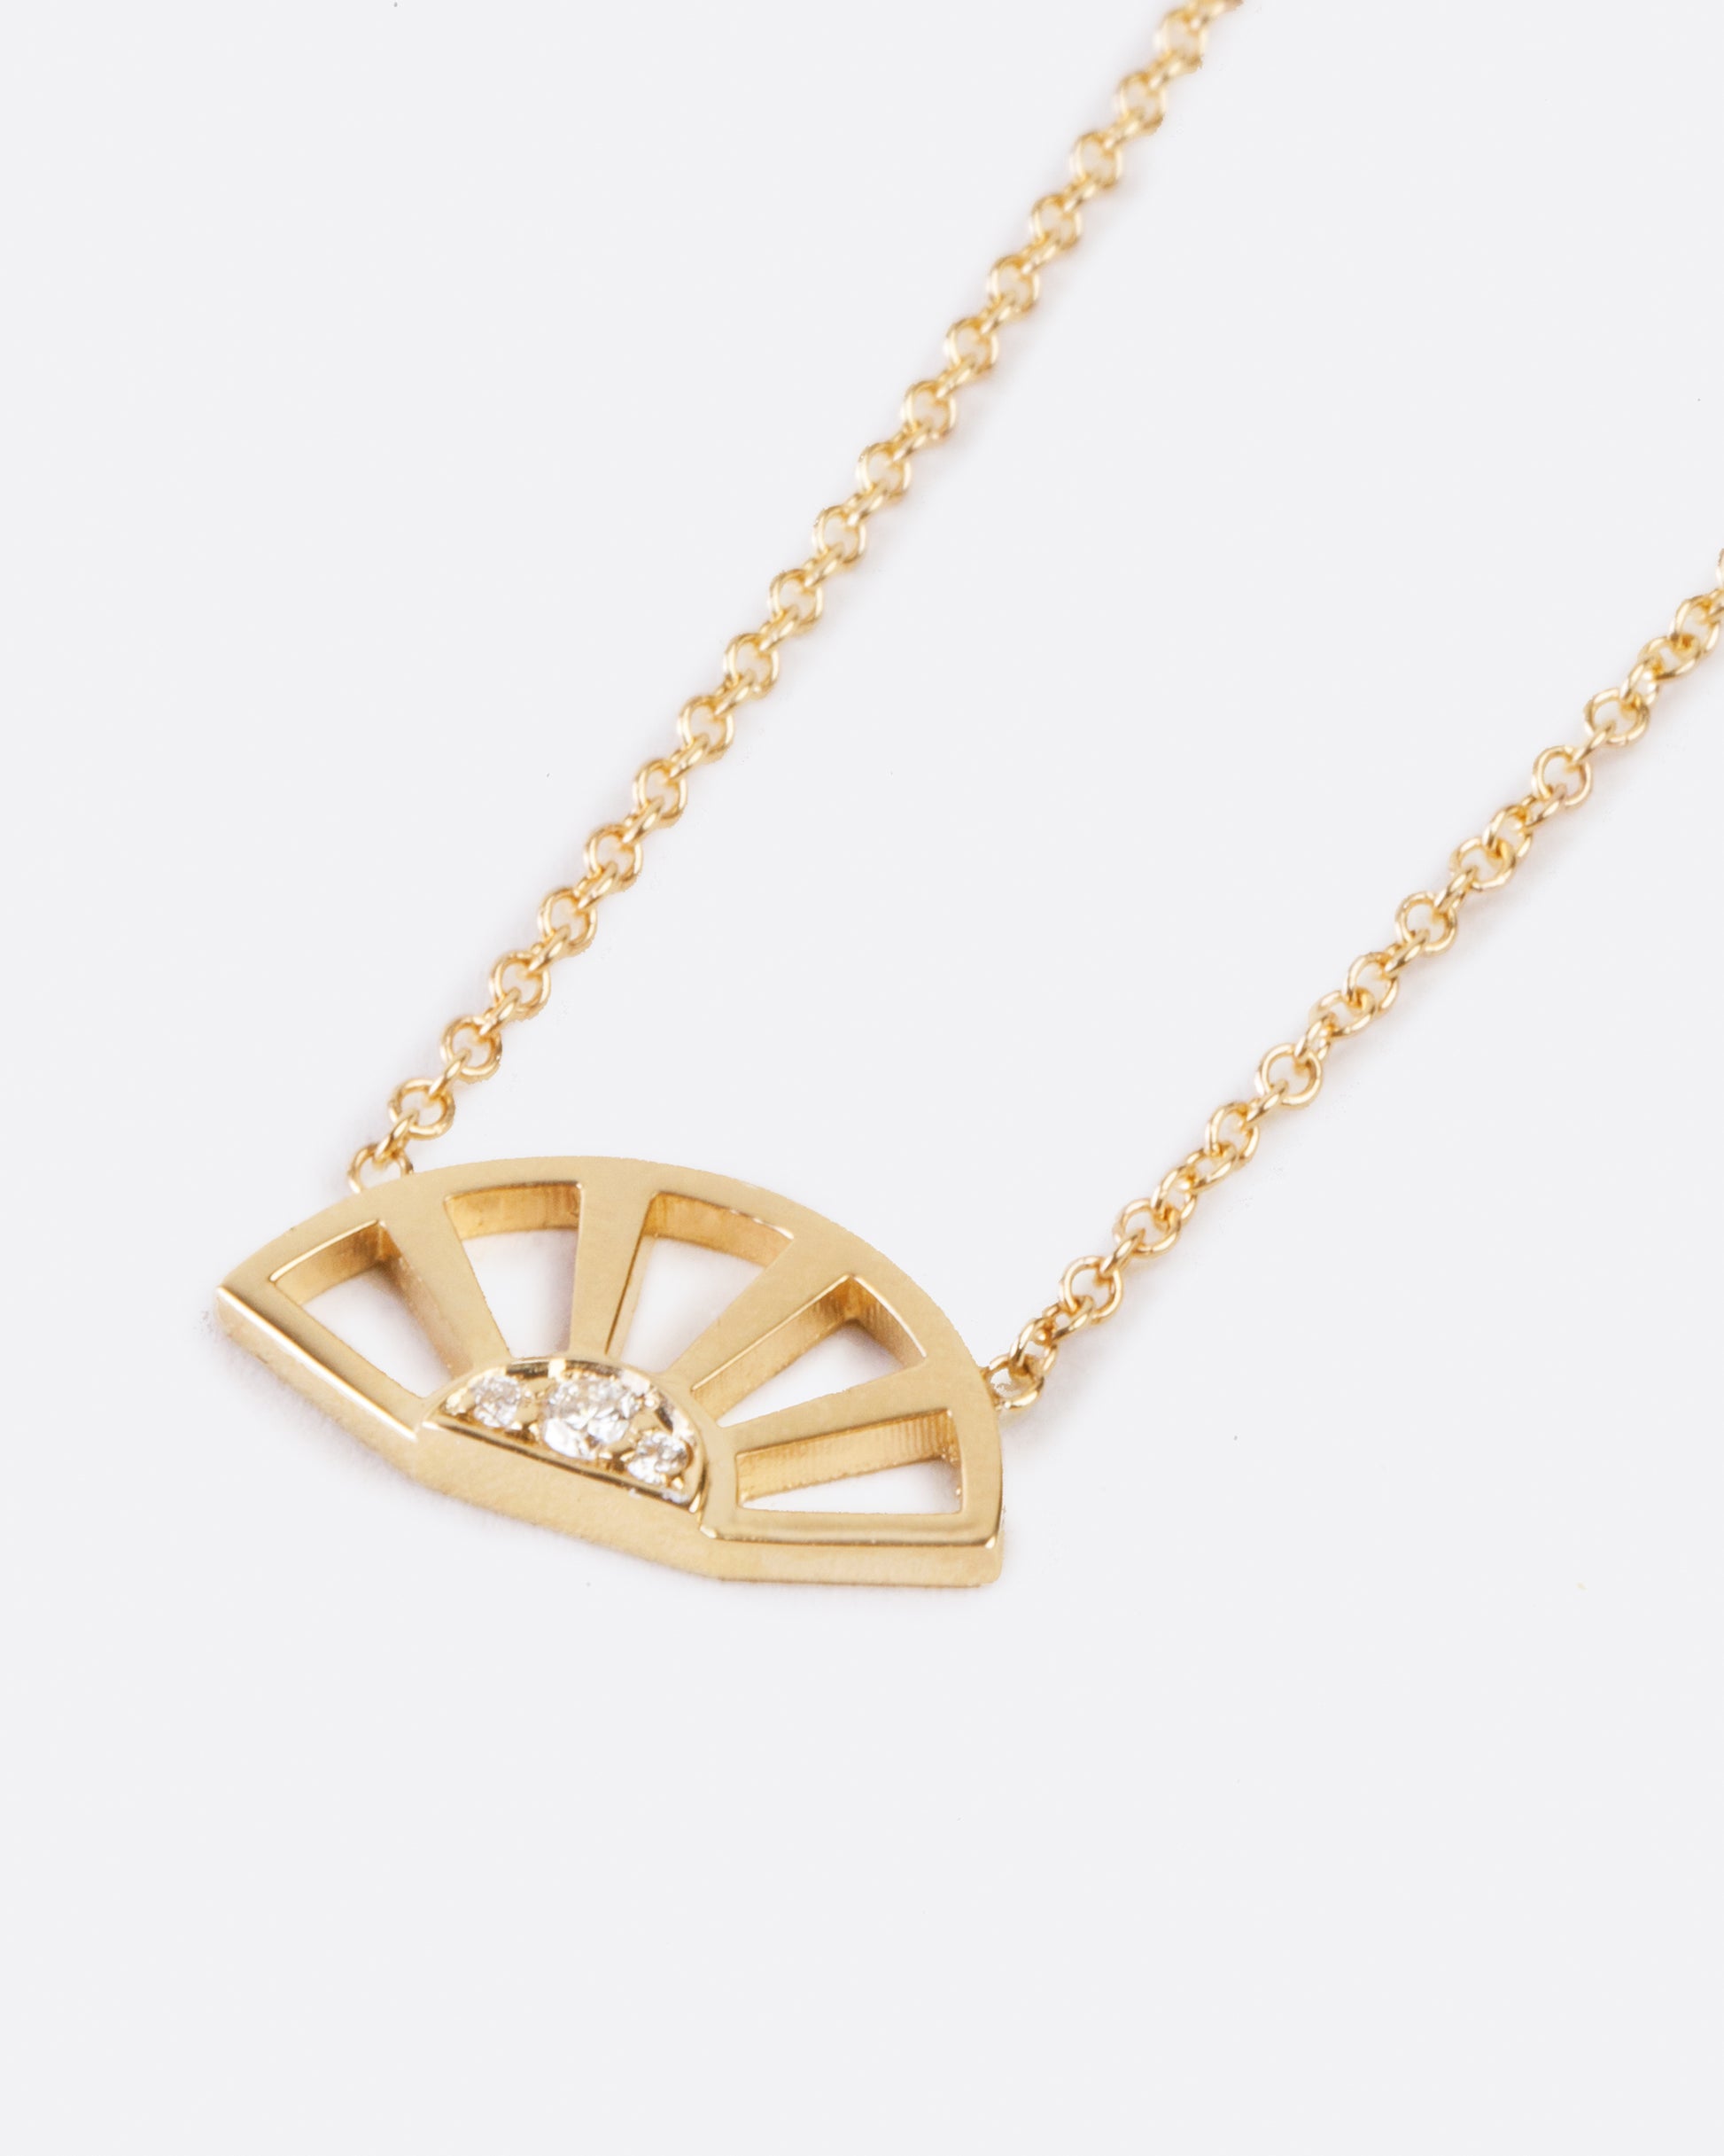 Designed to look like a sunset, this pendant necklace features three white diamonds set at the center of a yellow gold sun.